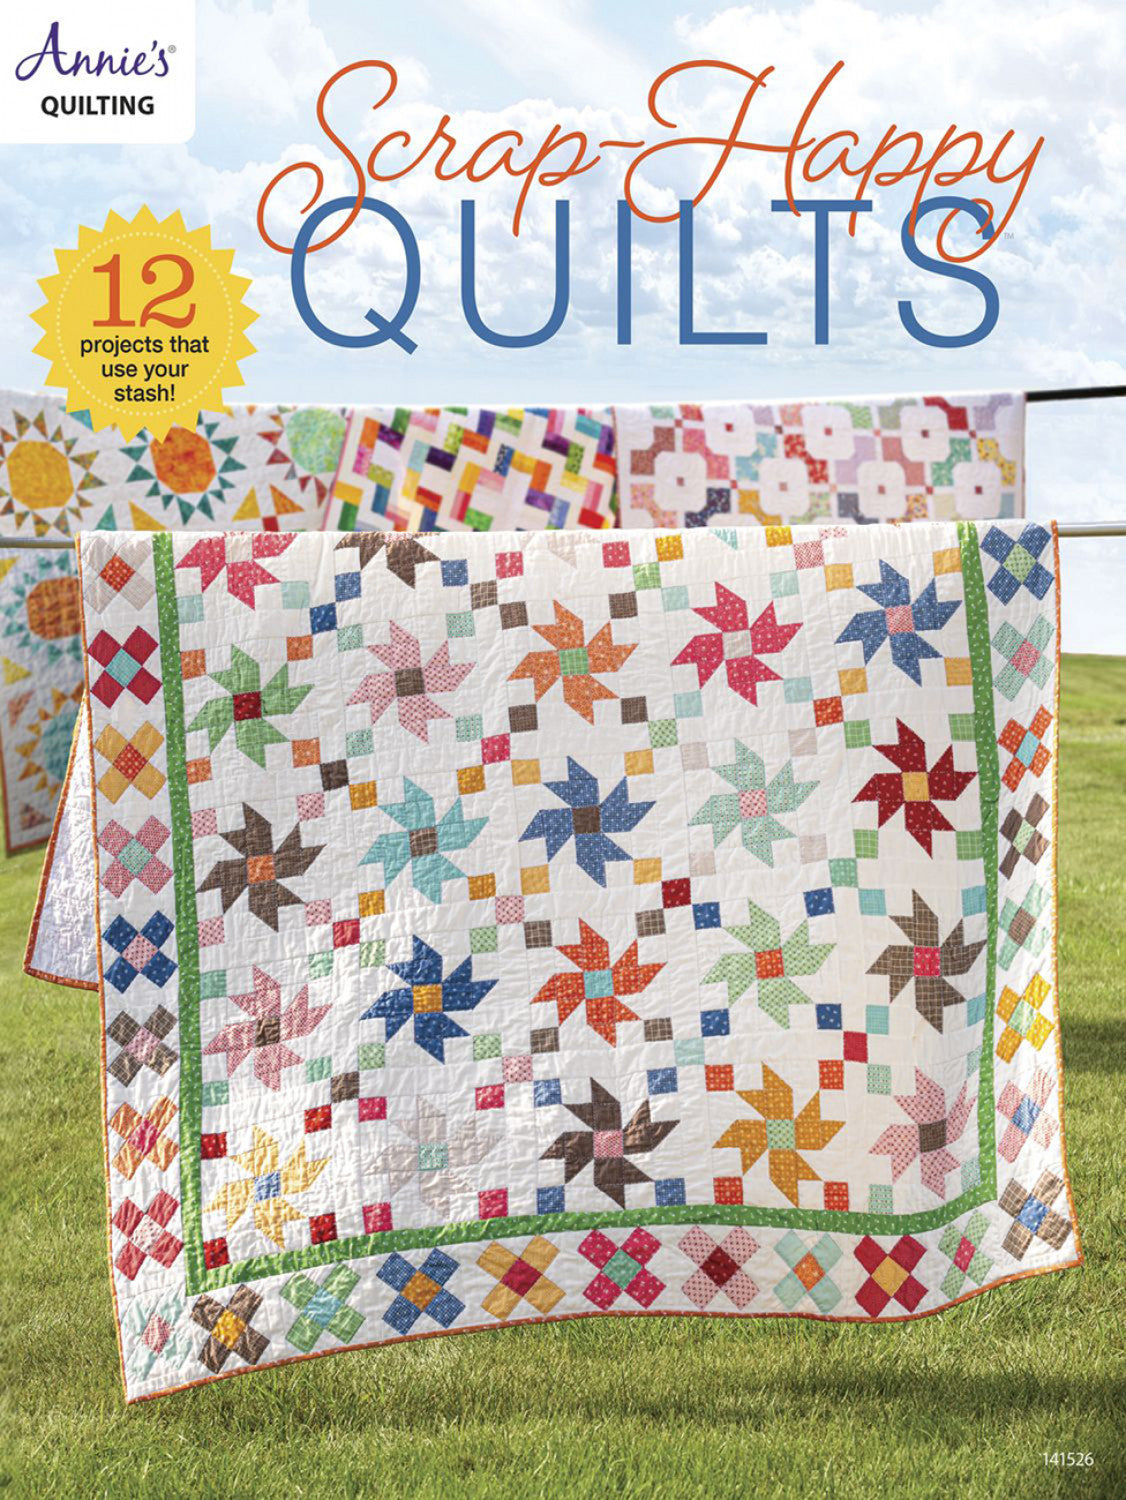 Scrap-Happy Quilts from Annie's Quilting - 141526